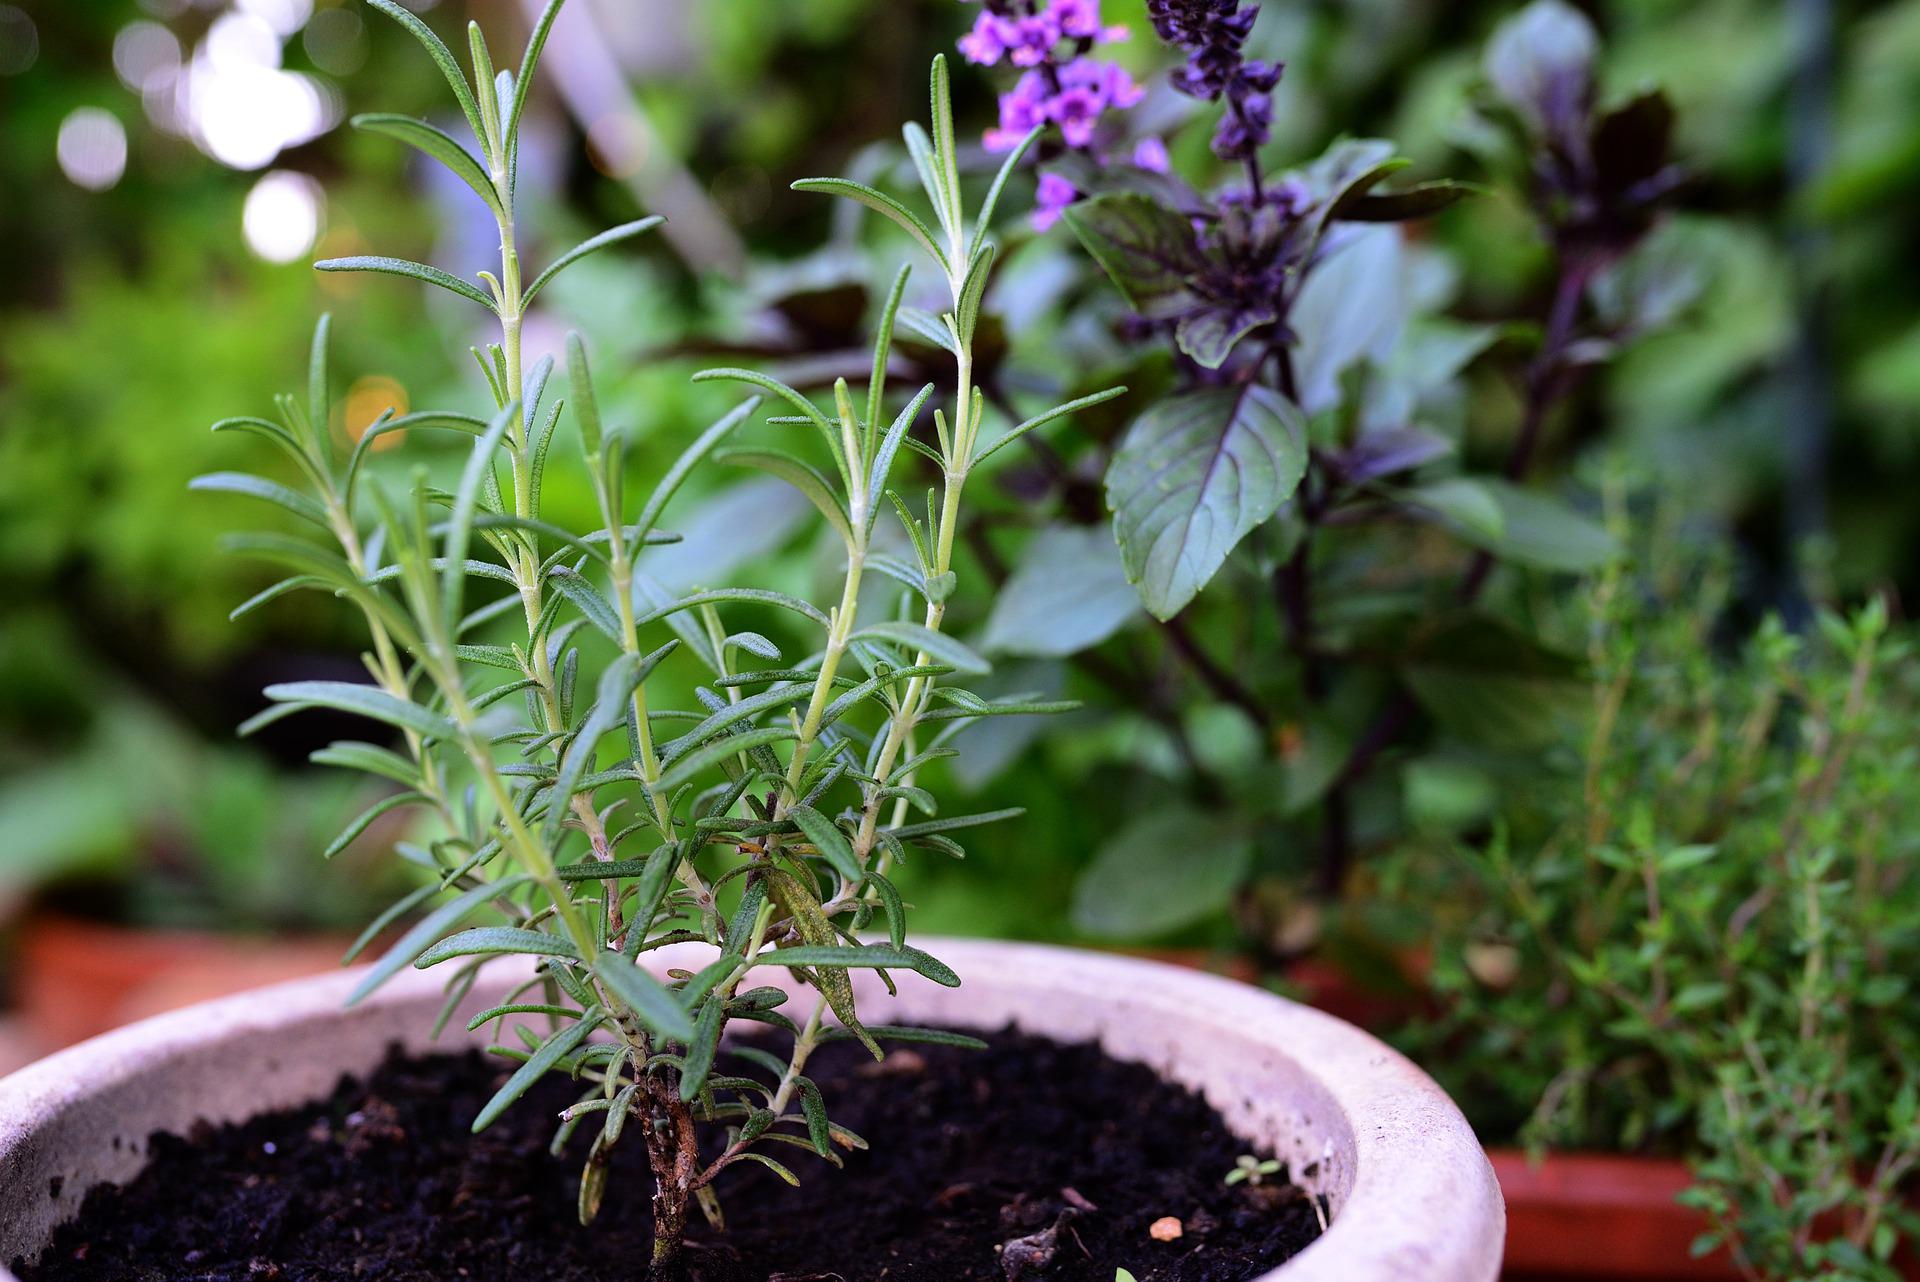 The 10 Easiest Herbs To Grow: Herbs Growing In Pots For Cooking